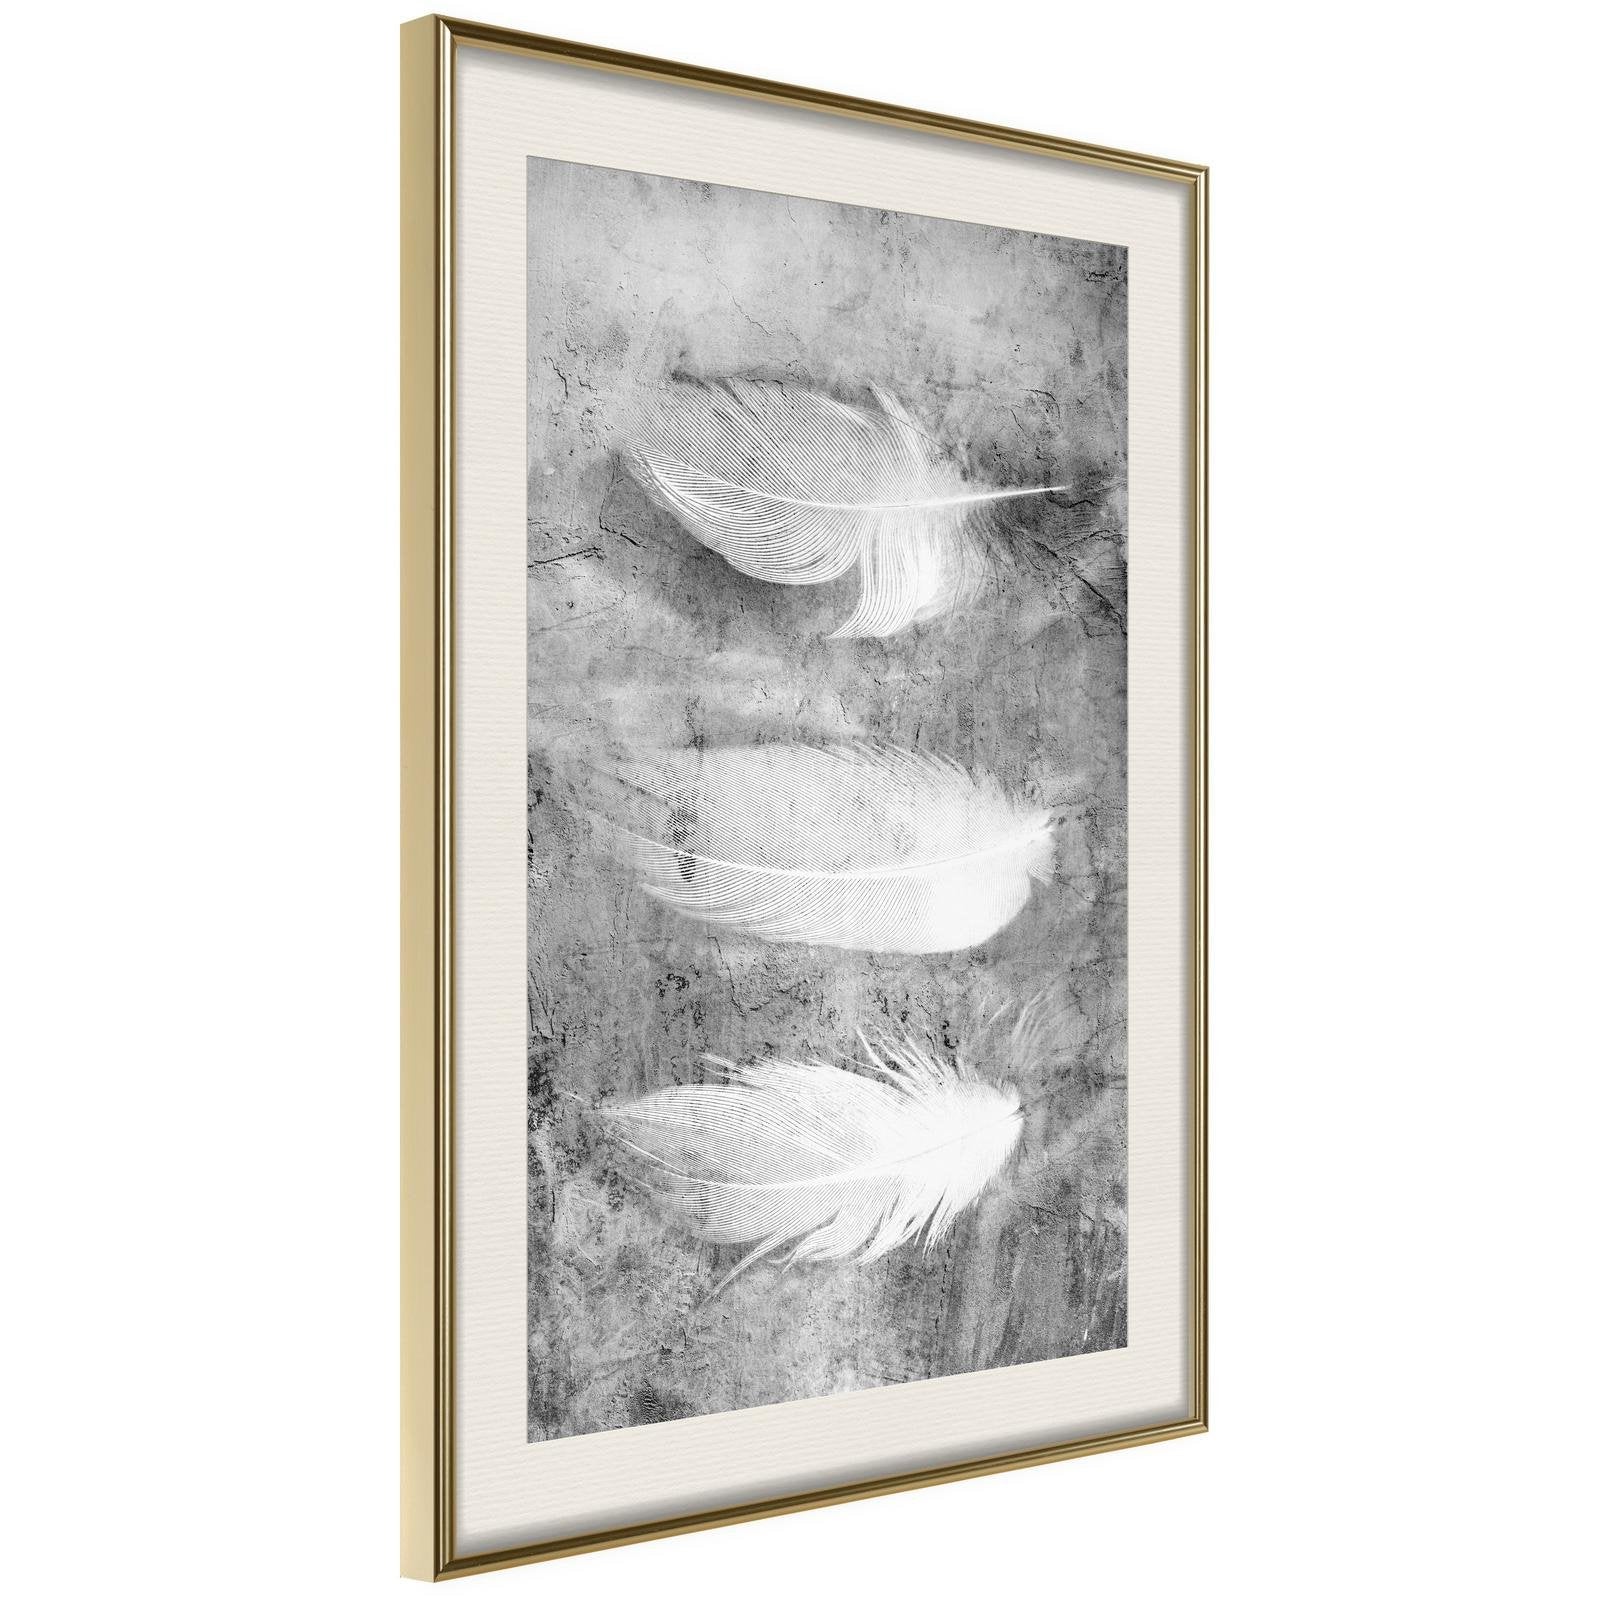 Inramad Poster / Tavla - Delicate Feathers - 30x45 Guldram med passepartout